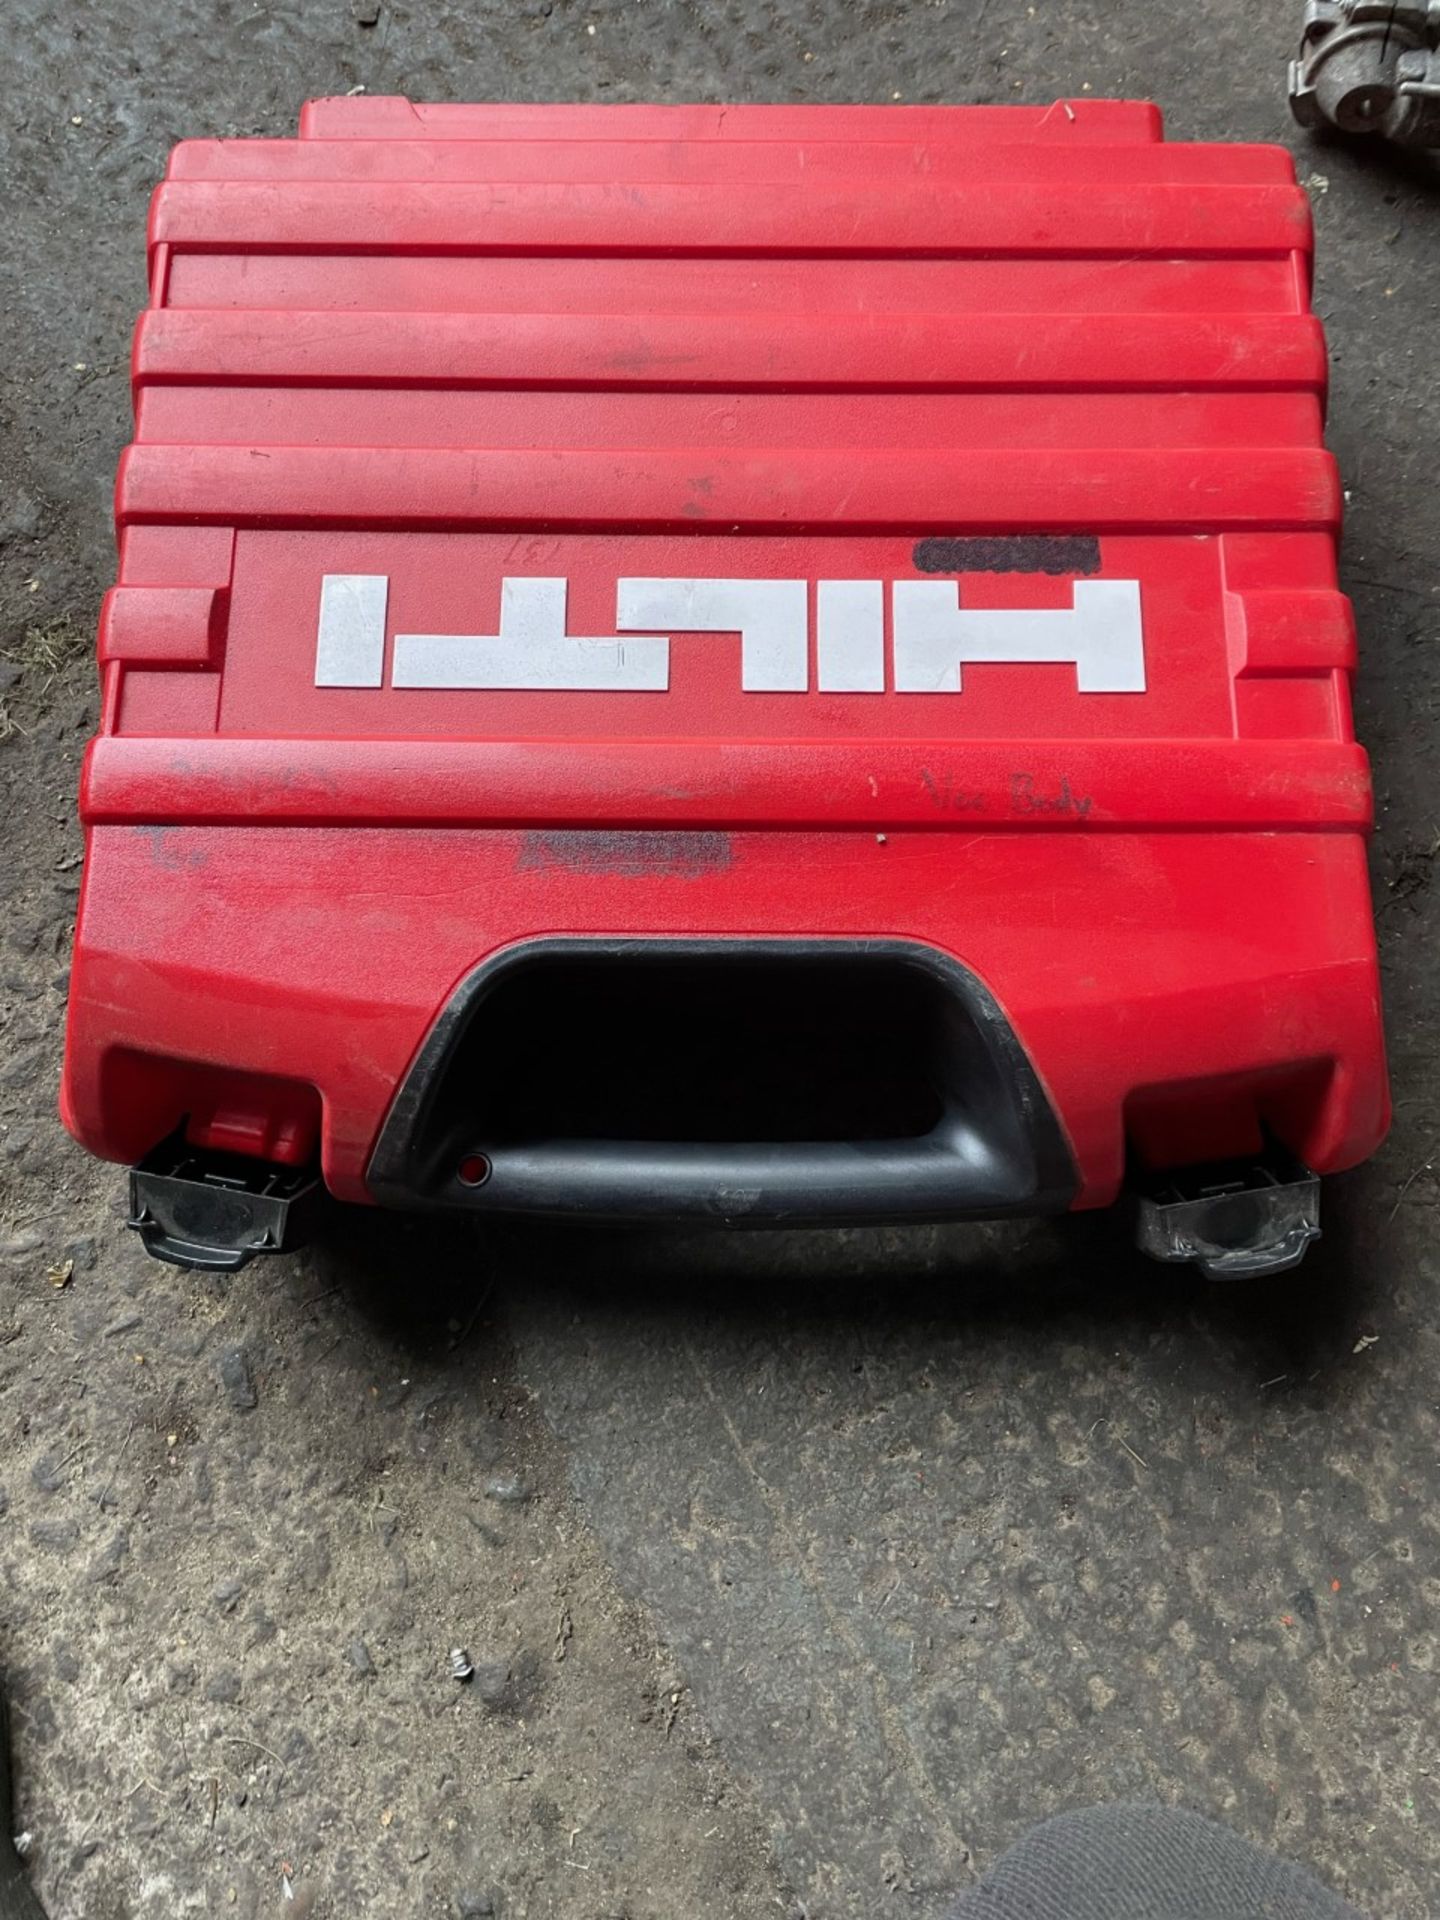 HILTI TE DRS-4A dust removal body for drilling - Image 3 of 3